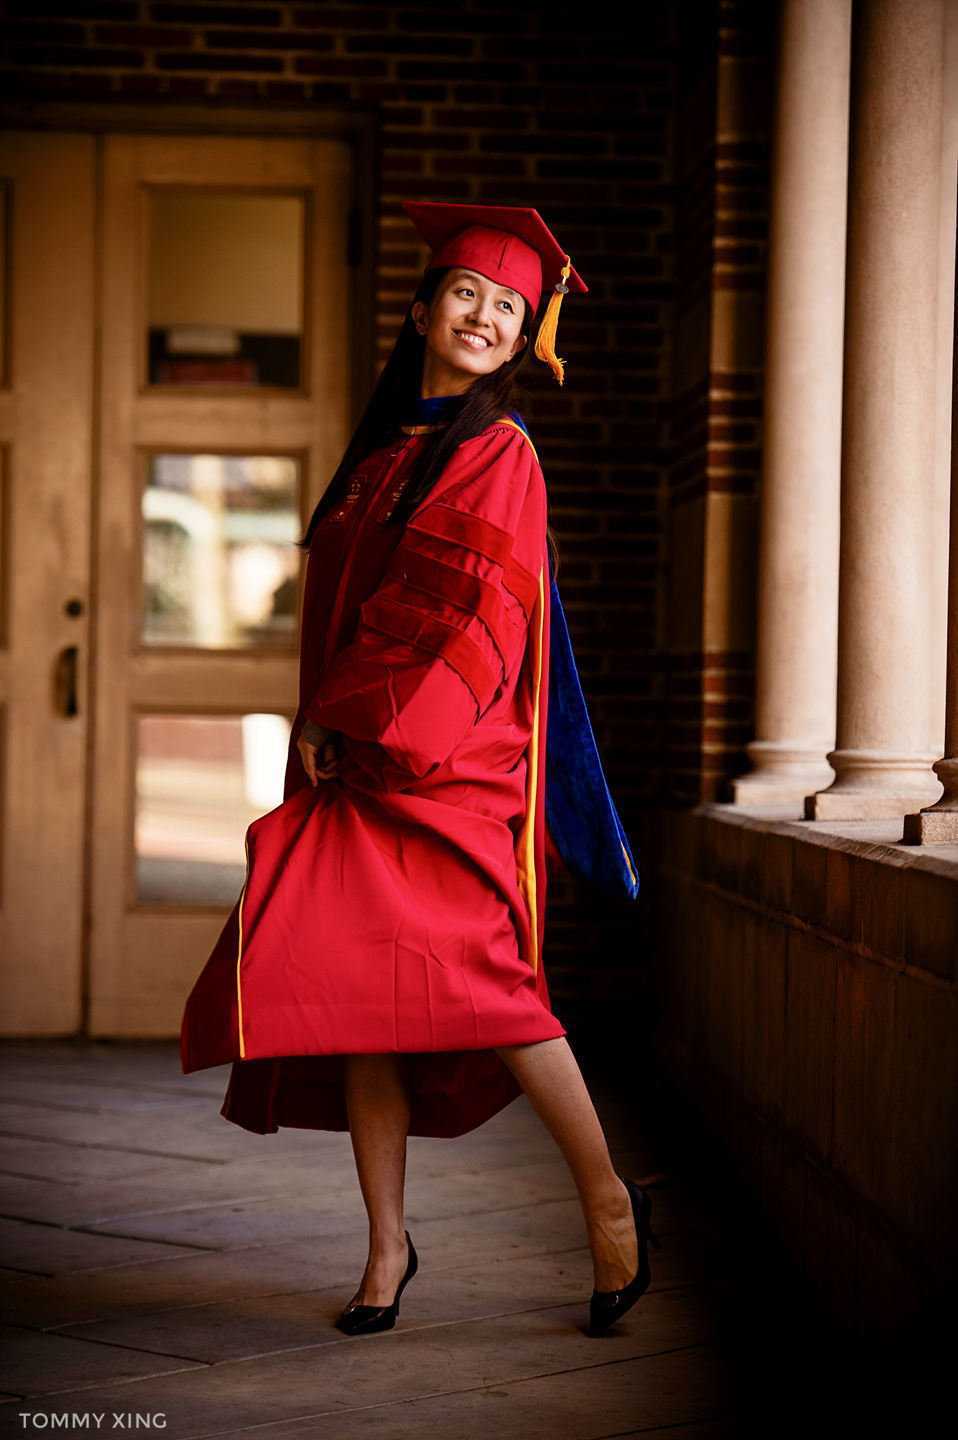 Graduation portrait photography - USC - Los Angeles - Tommy Xing Photography 02.jpg